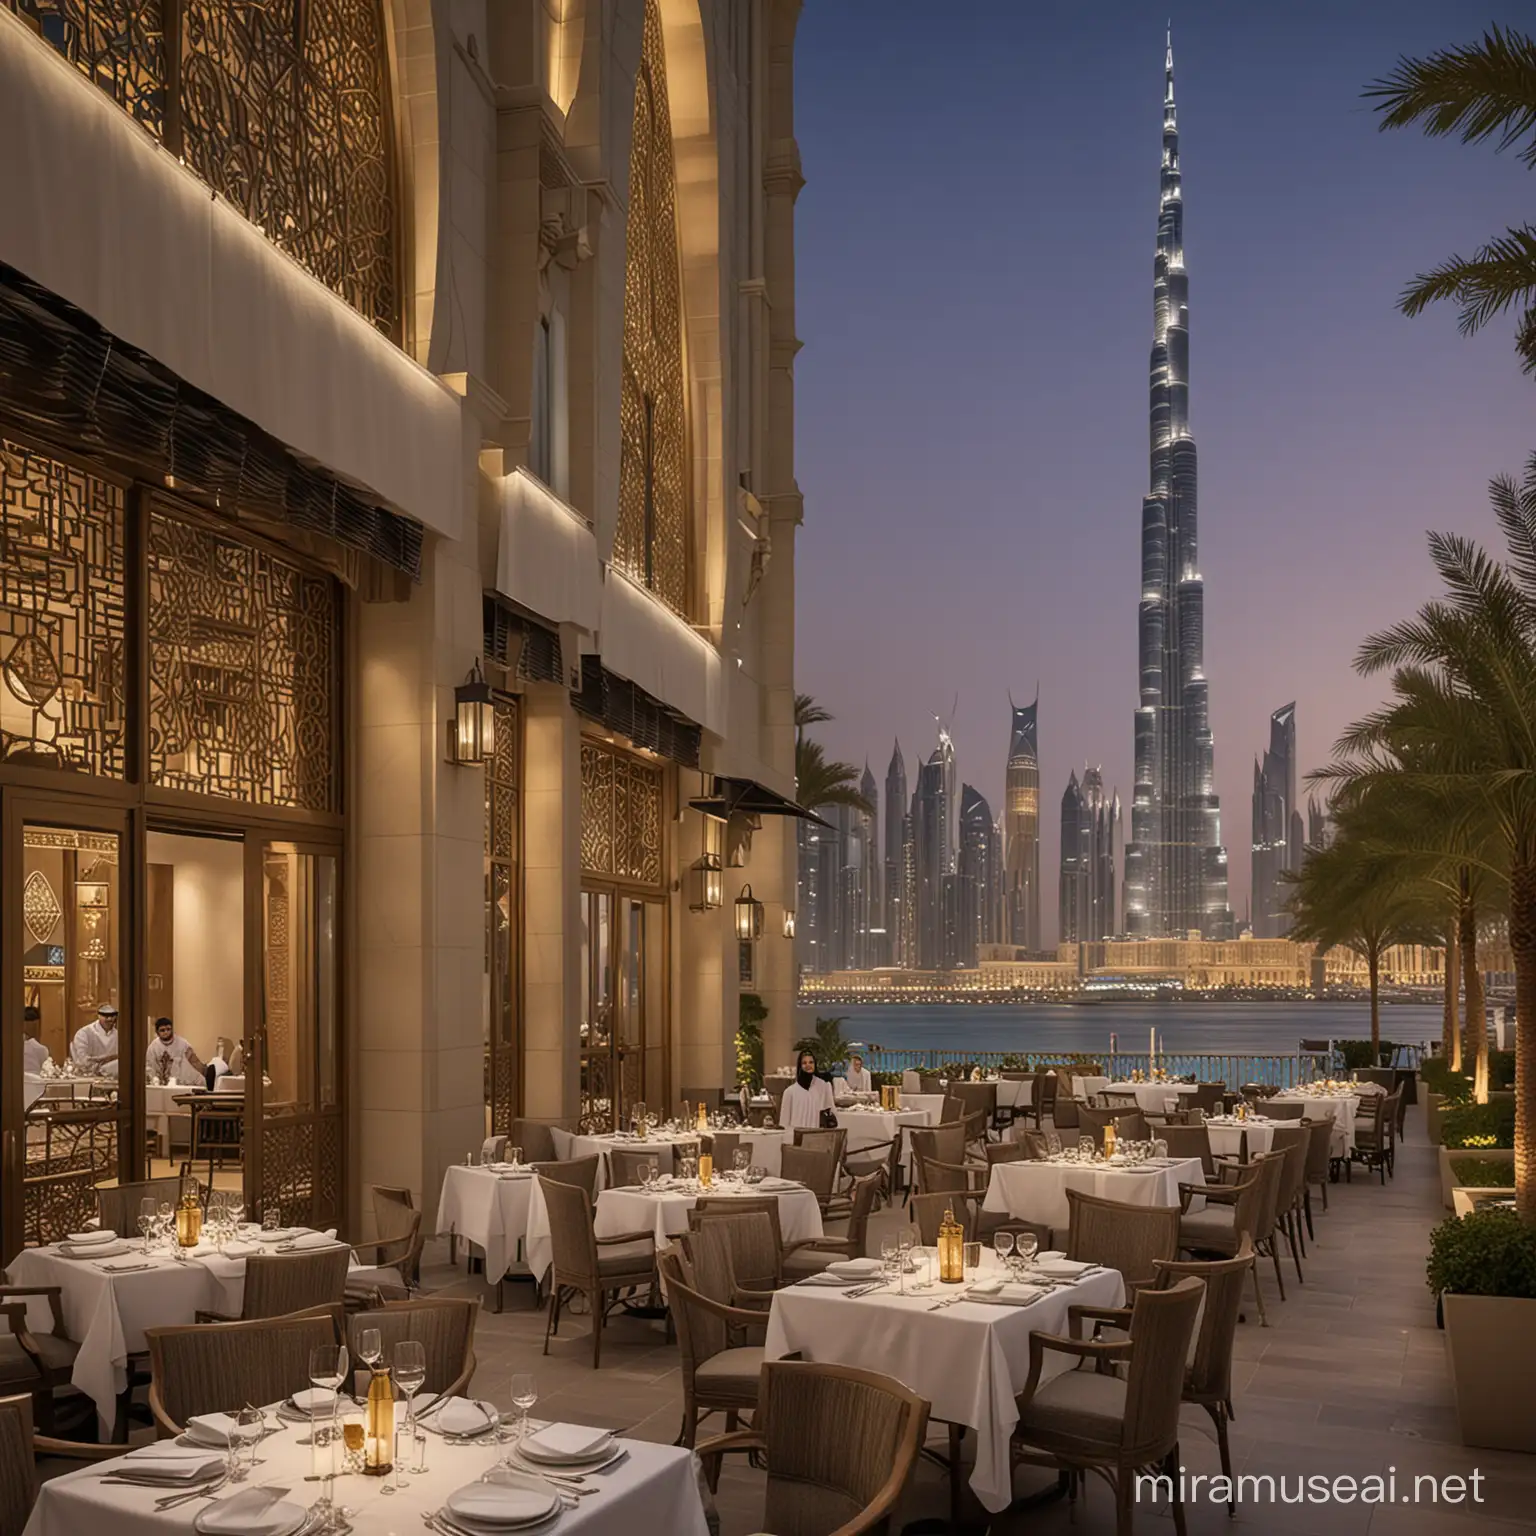 Imagine a bustling Dubai skyline in the background, with towering skyscrapers and the iconic Burj Khalifa piercing the sky. In the foreground, an elegant restaurant facade adorned with intricate Arabian architecture stands out, with a sign proudly displaying the name of your dream food and beverage business. The atmosphere exudes luxury and sophistication, drawing in passersby with the promise of exquisite dining experiences. Patrons are seen enjoying delicious dishes and refreshing beverages, their smiles reflecting satisfaction and contentment. This image captures the essence of launching your culinary venture in the vibrant city of Dubai, where innovation meets tradition amidst a backdrop of opulence and opportunity.